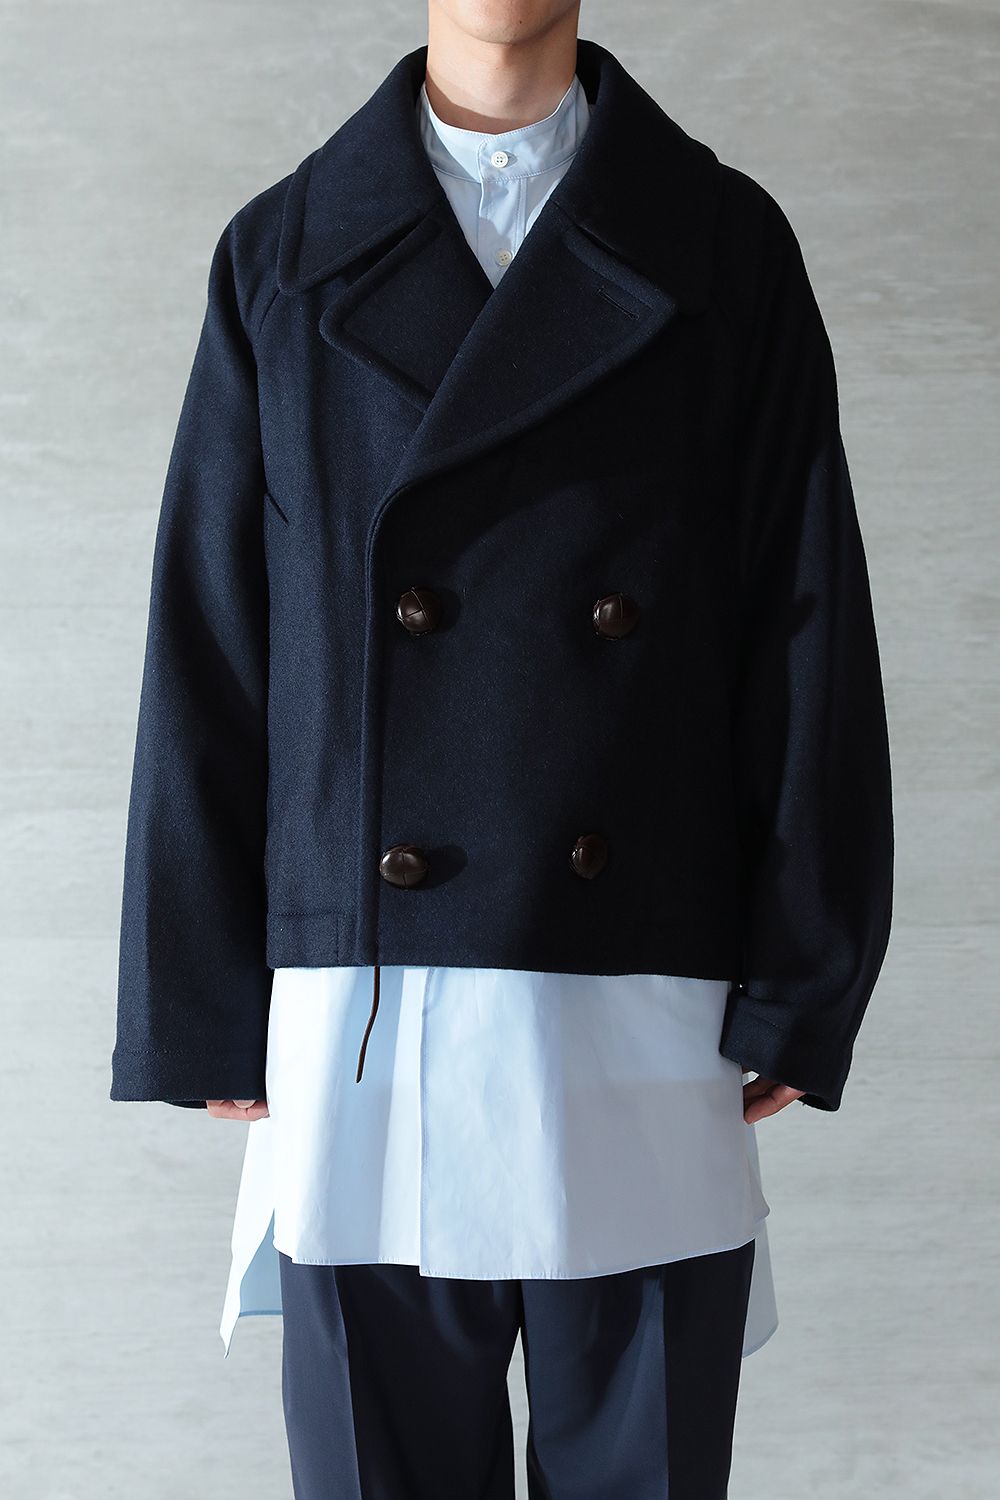 CROPPED PEA COAT(NAVY COOL WOOL) - S